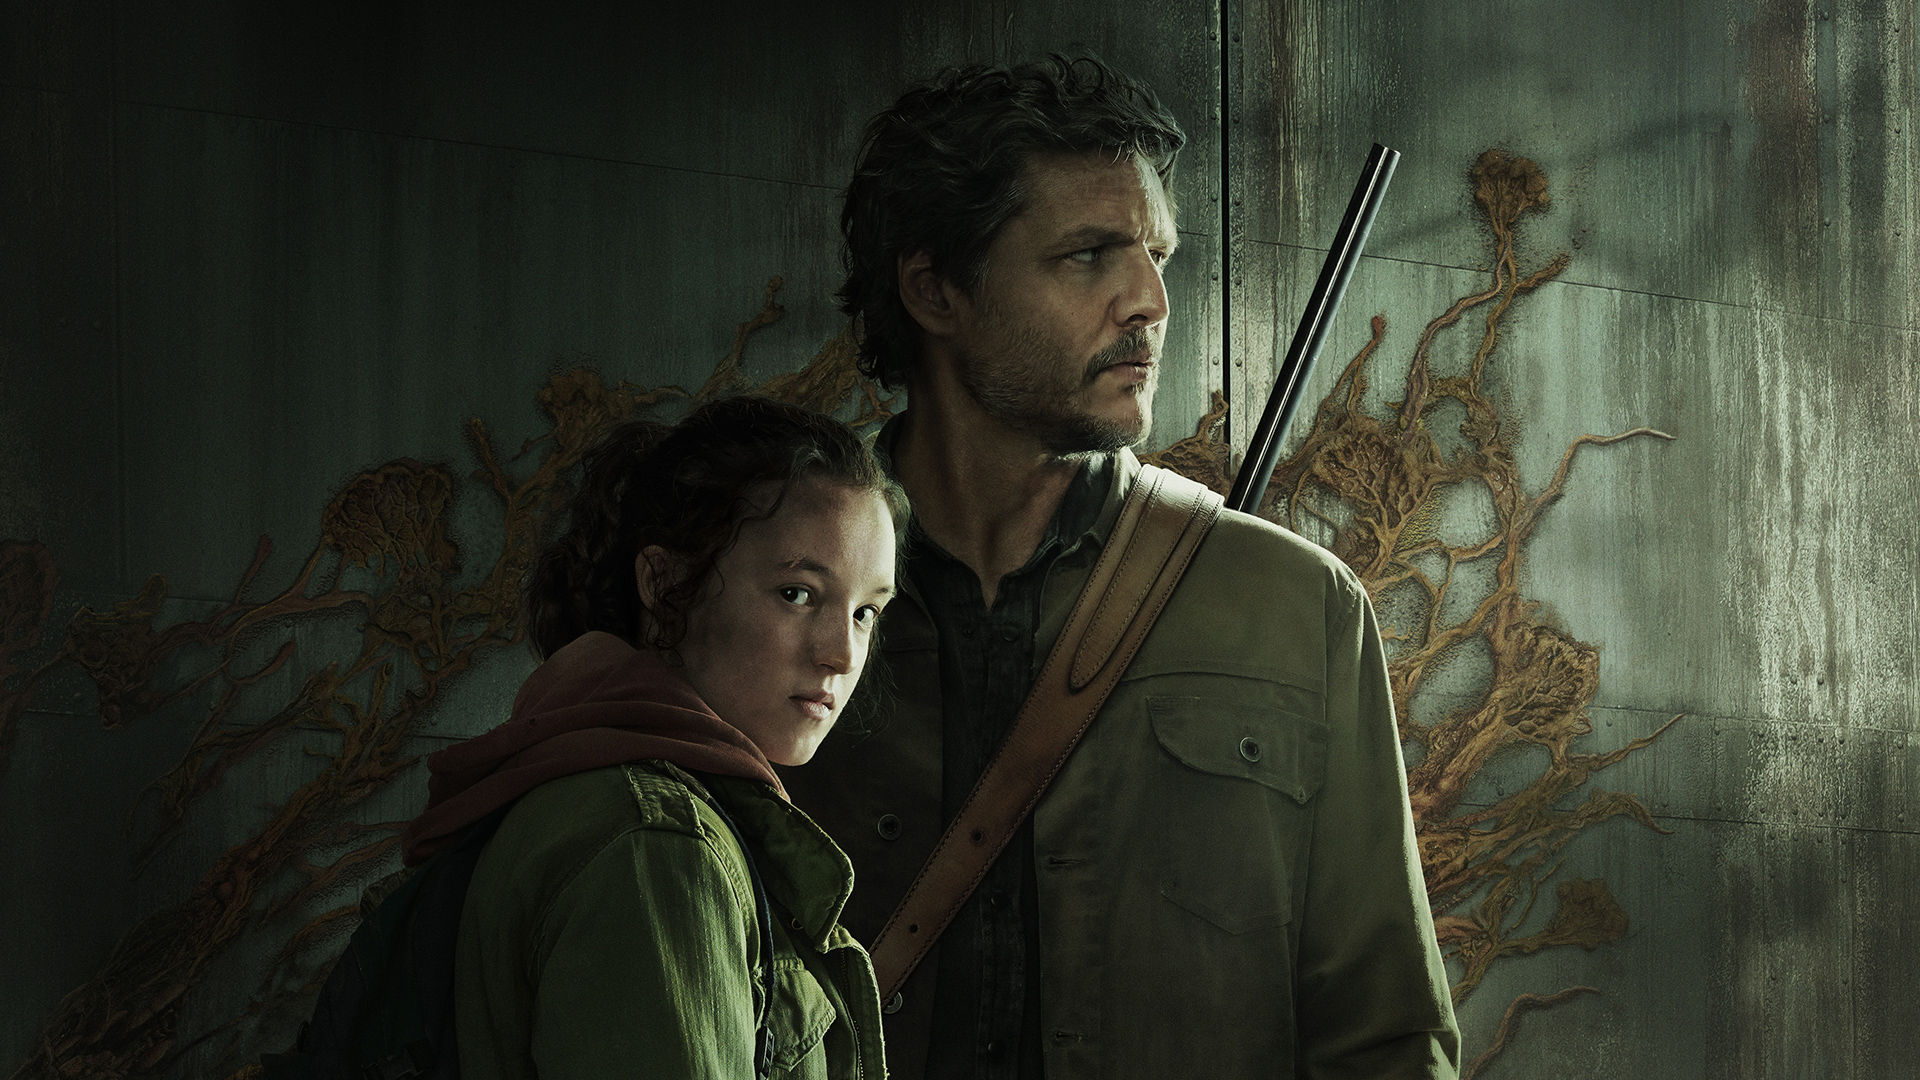 Ellie Belli Ramsey and Joel Pedro Pascala in The Last of Us promotional image